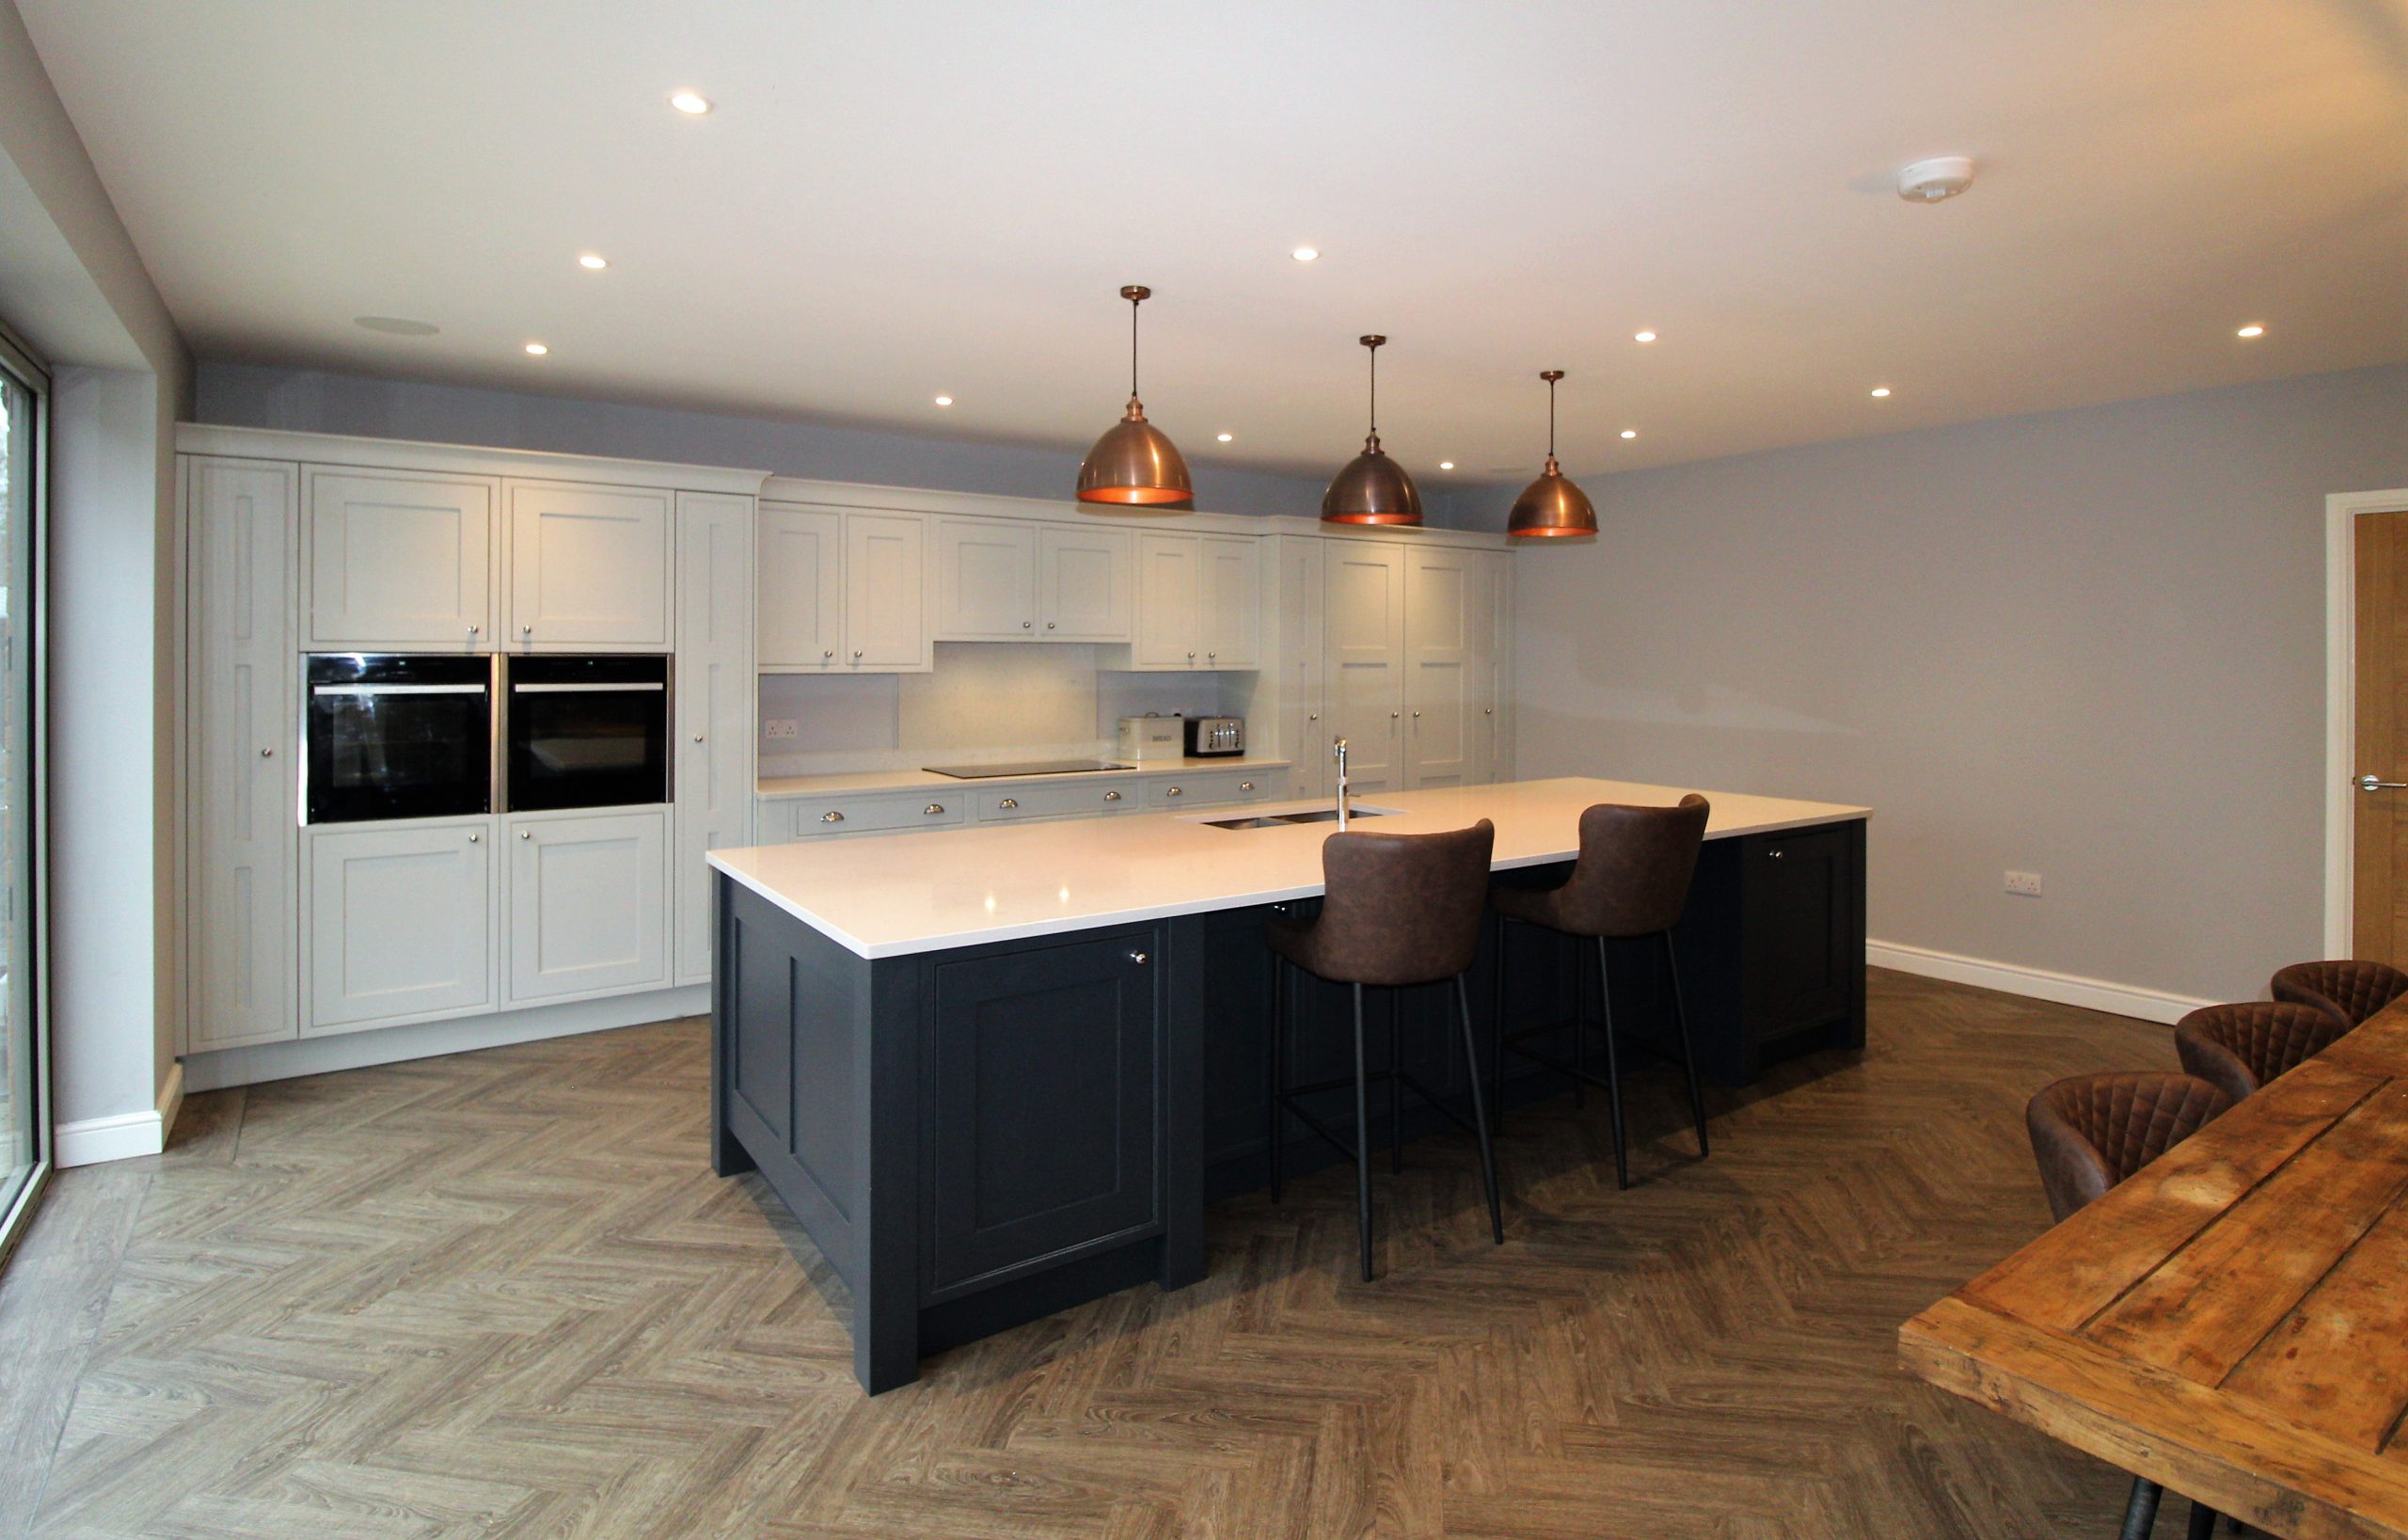 Marlow Bespoke Inframe Kitchen, Noble Kitchens, Coventry